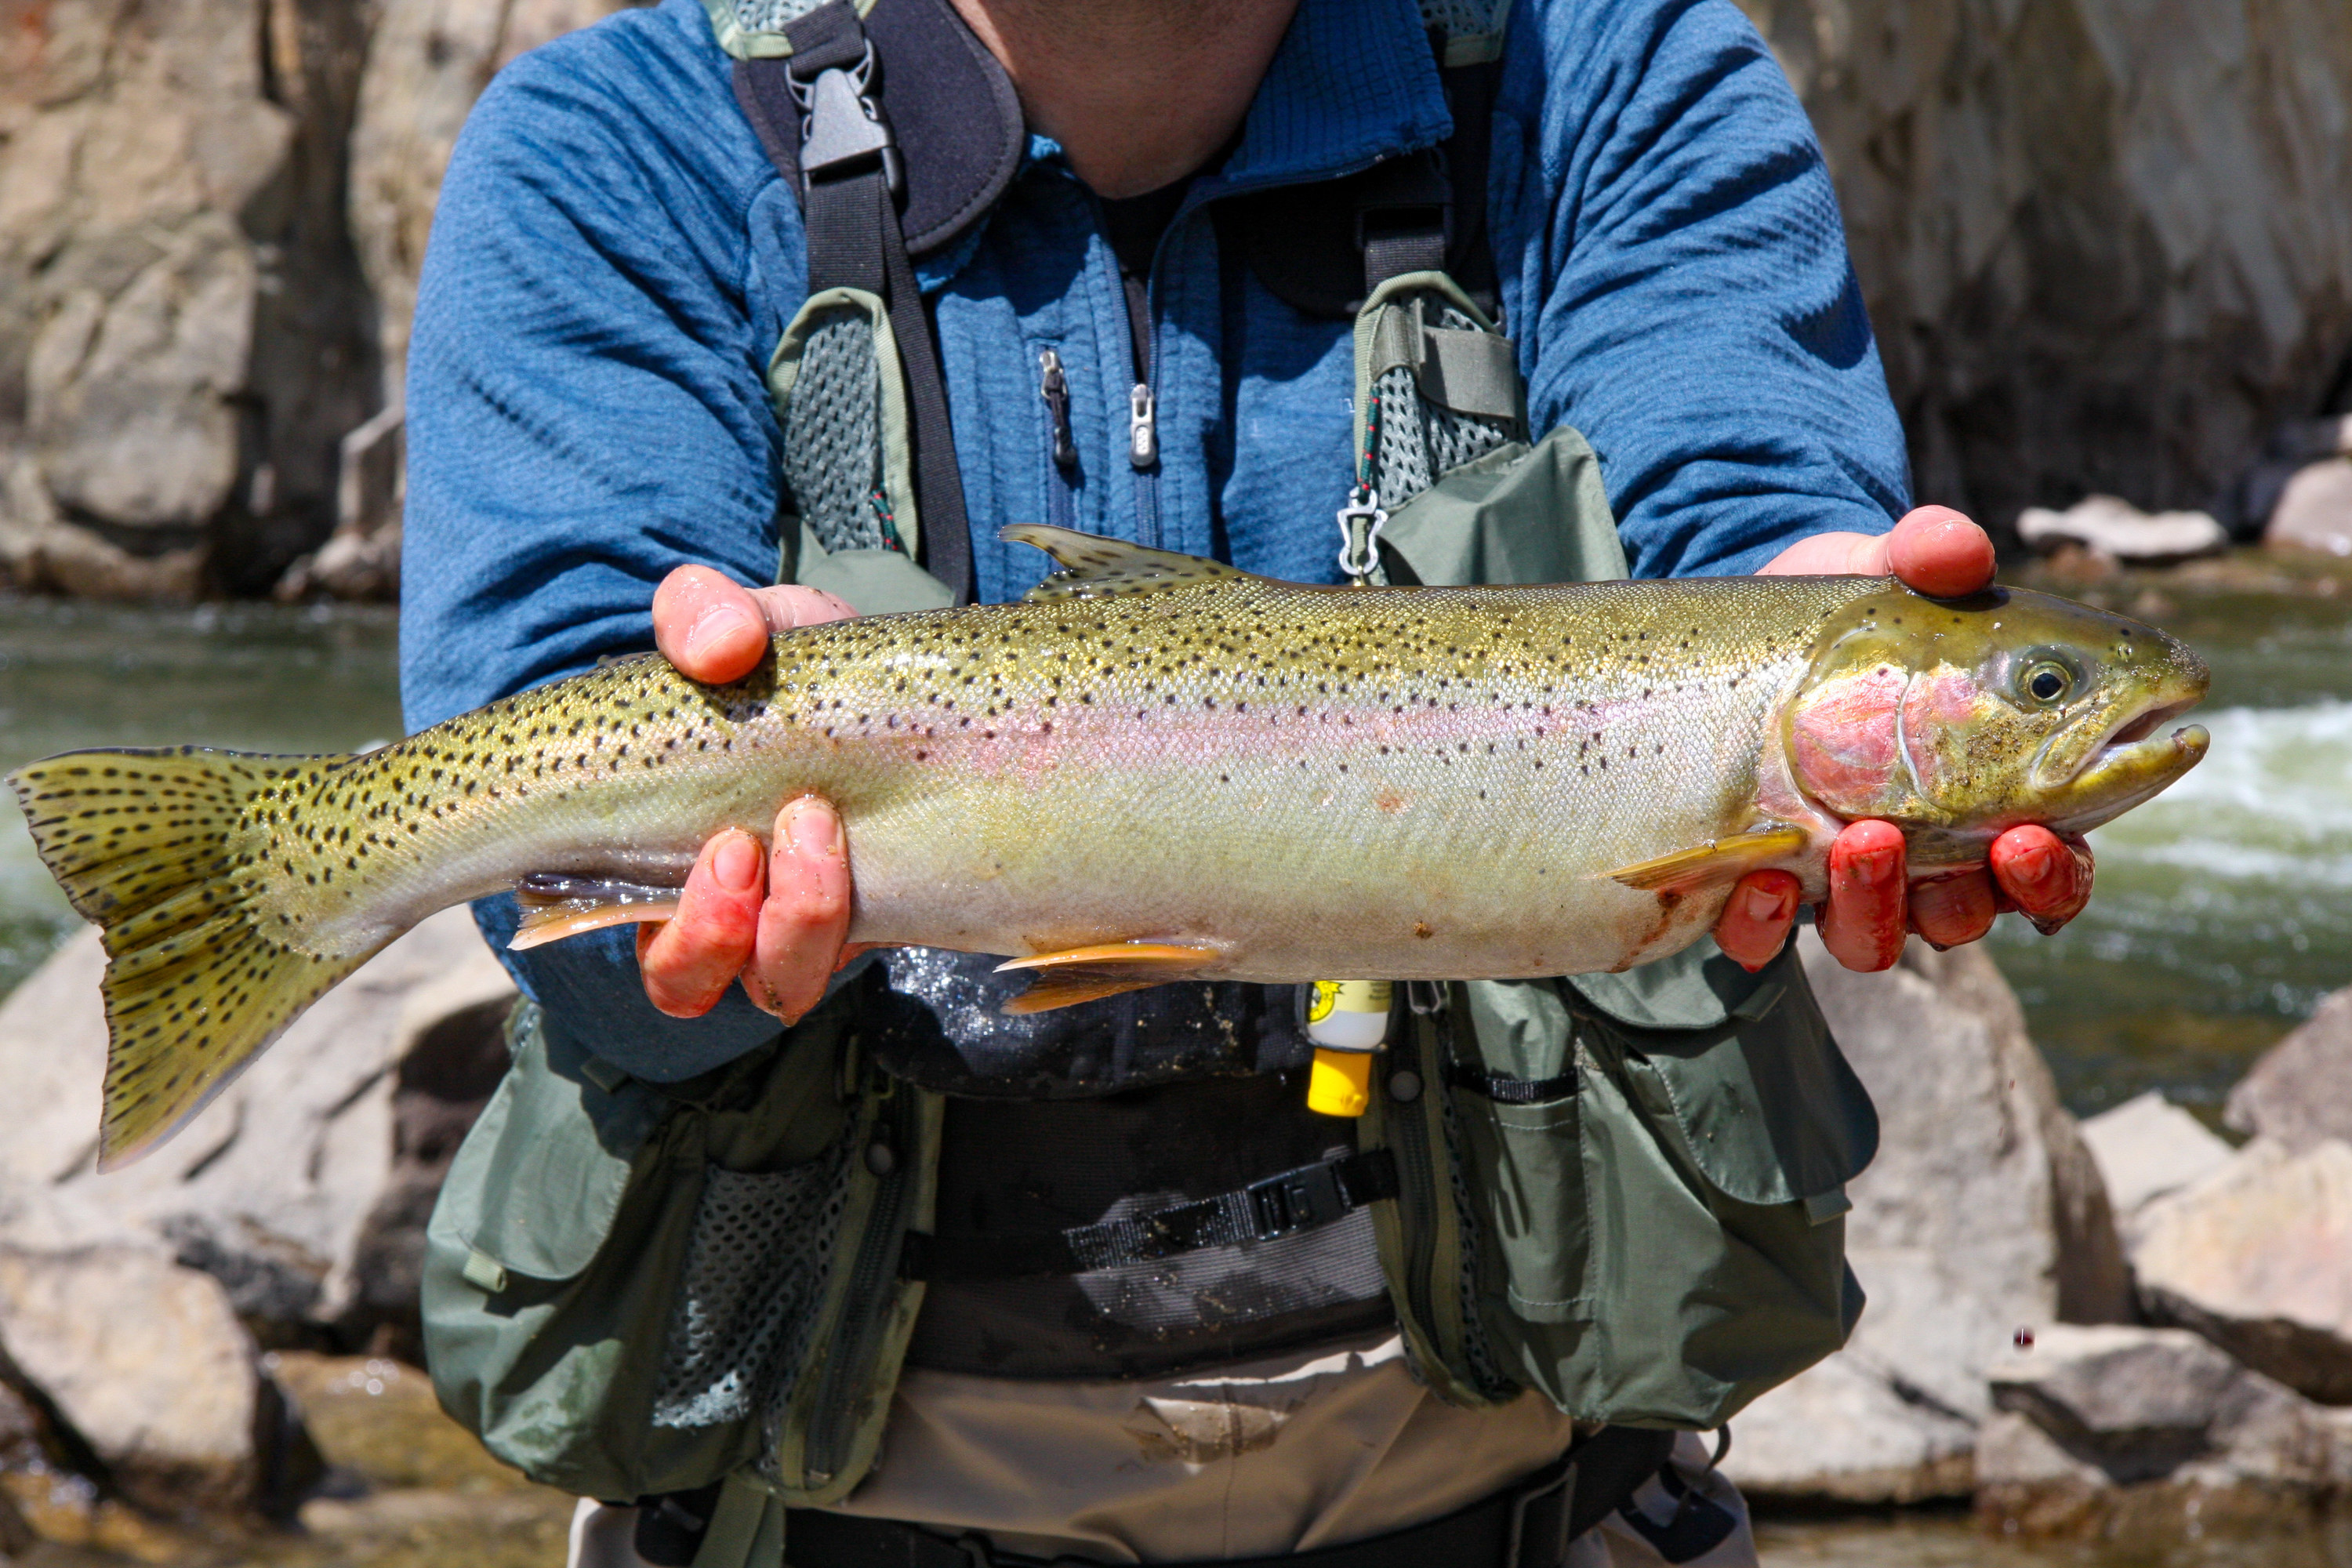 A fisherman holding up a fish he caught in Stanley, Idaho